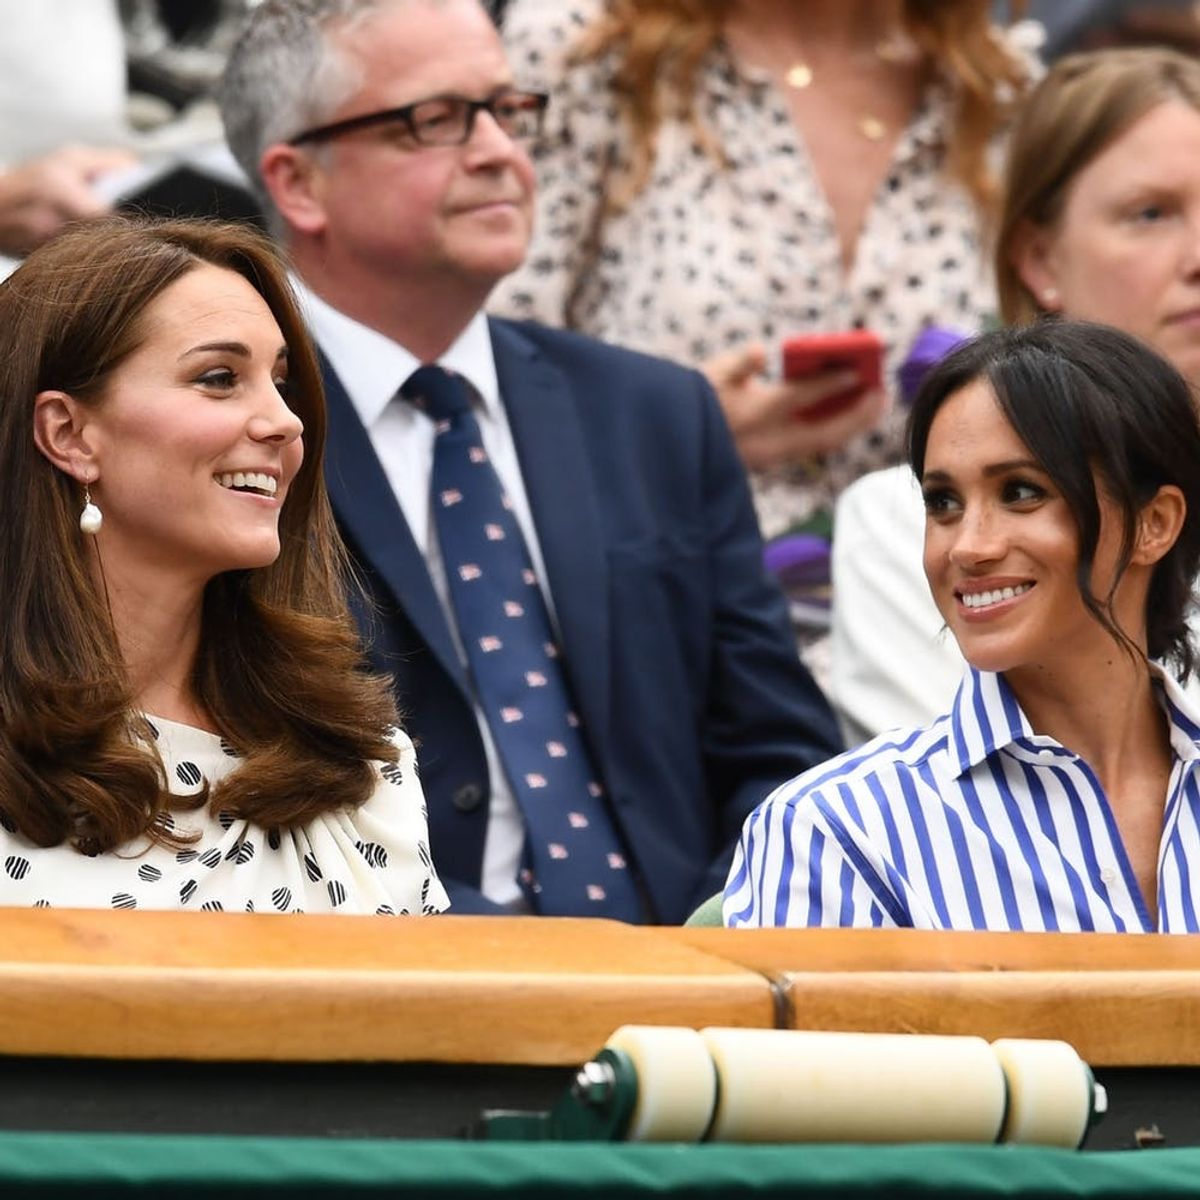 Duchesses Kate Middleton and Meghan Markle Had a Girls’ Day Out at Wimbledon